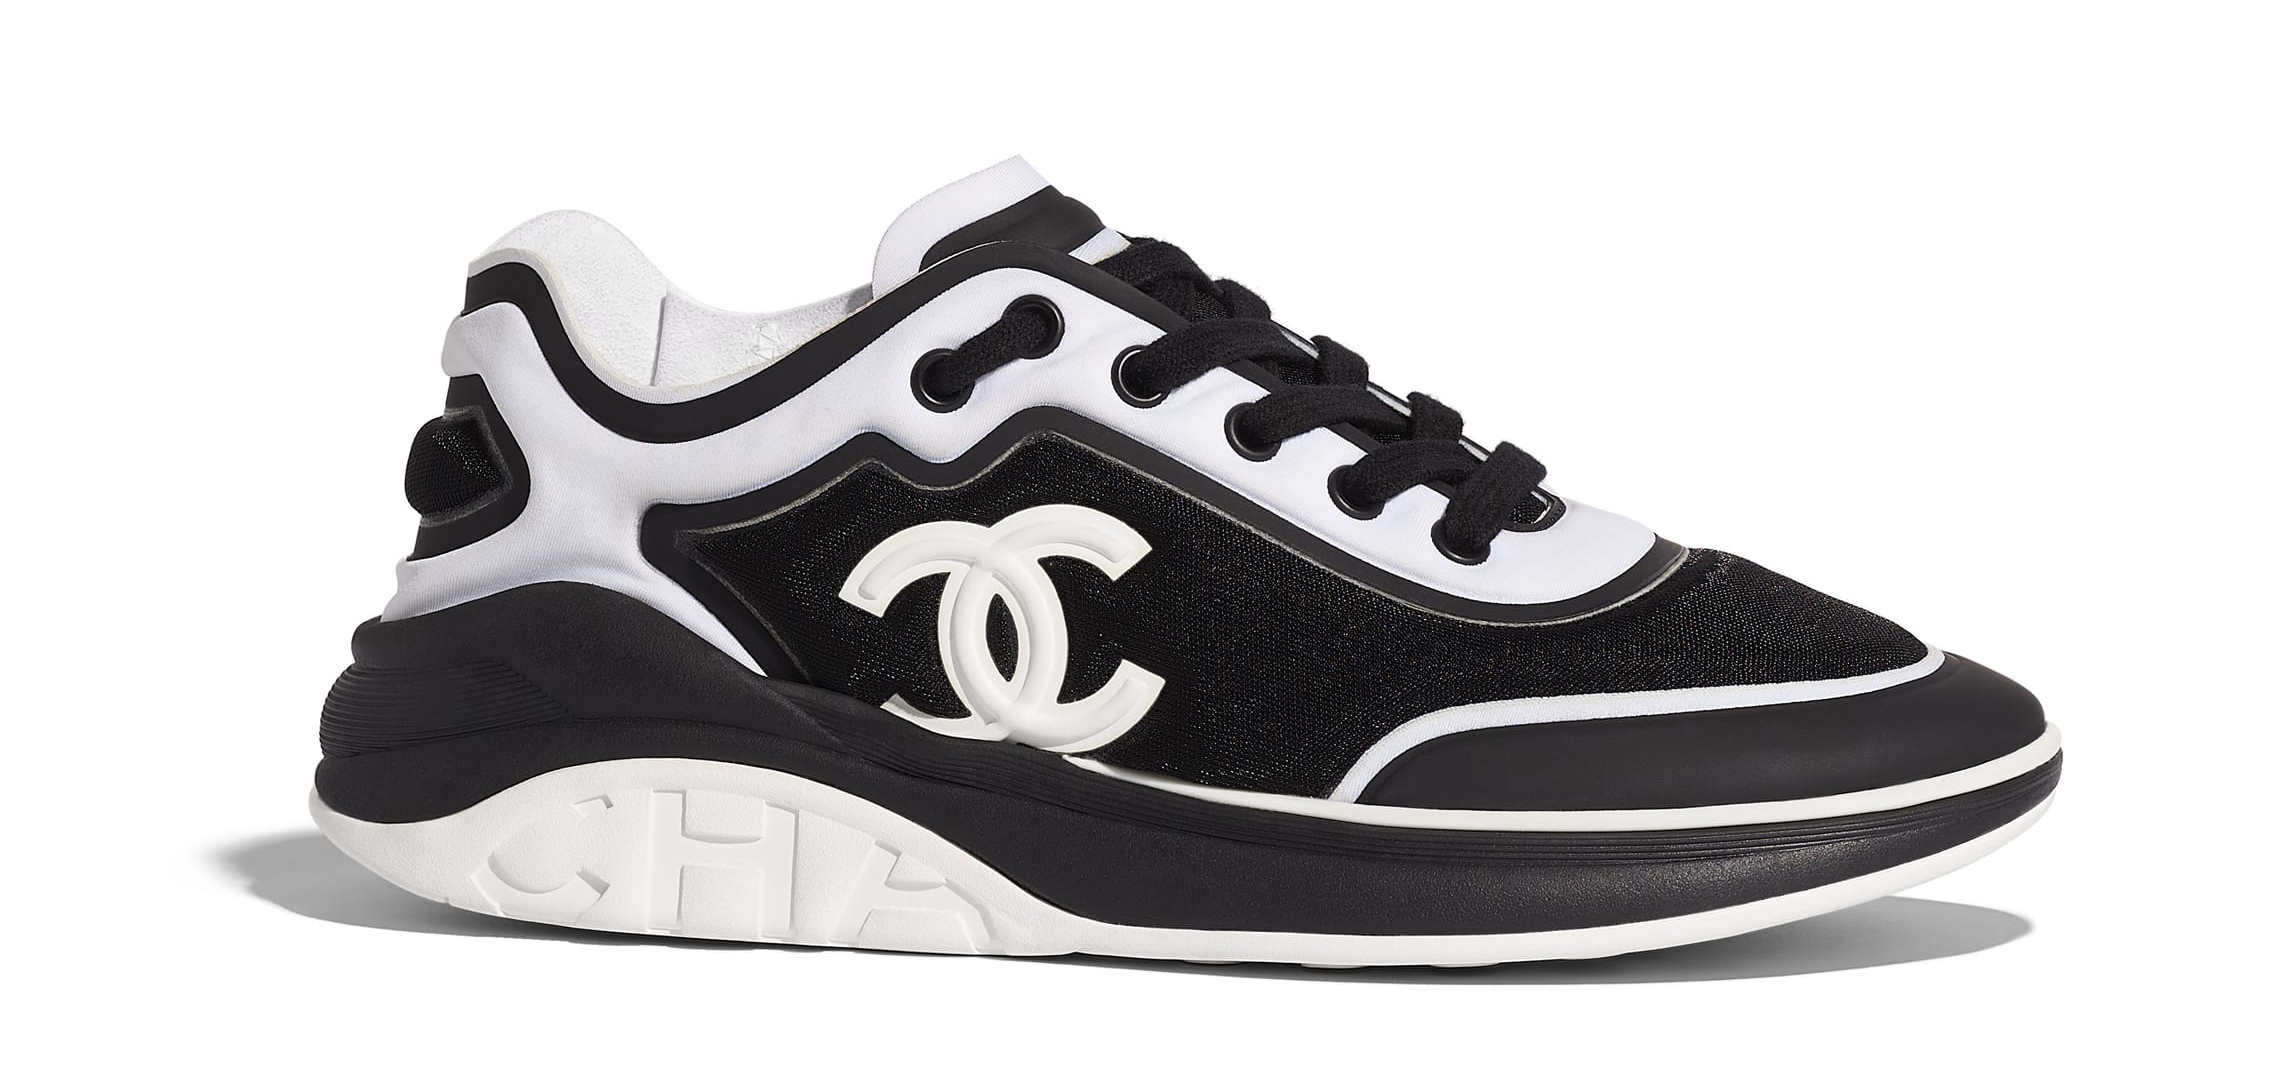 buy chanel shoes online